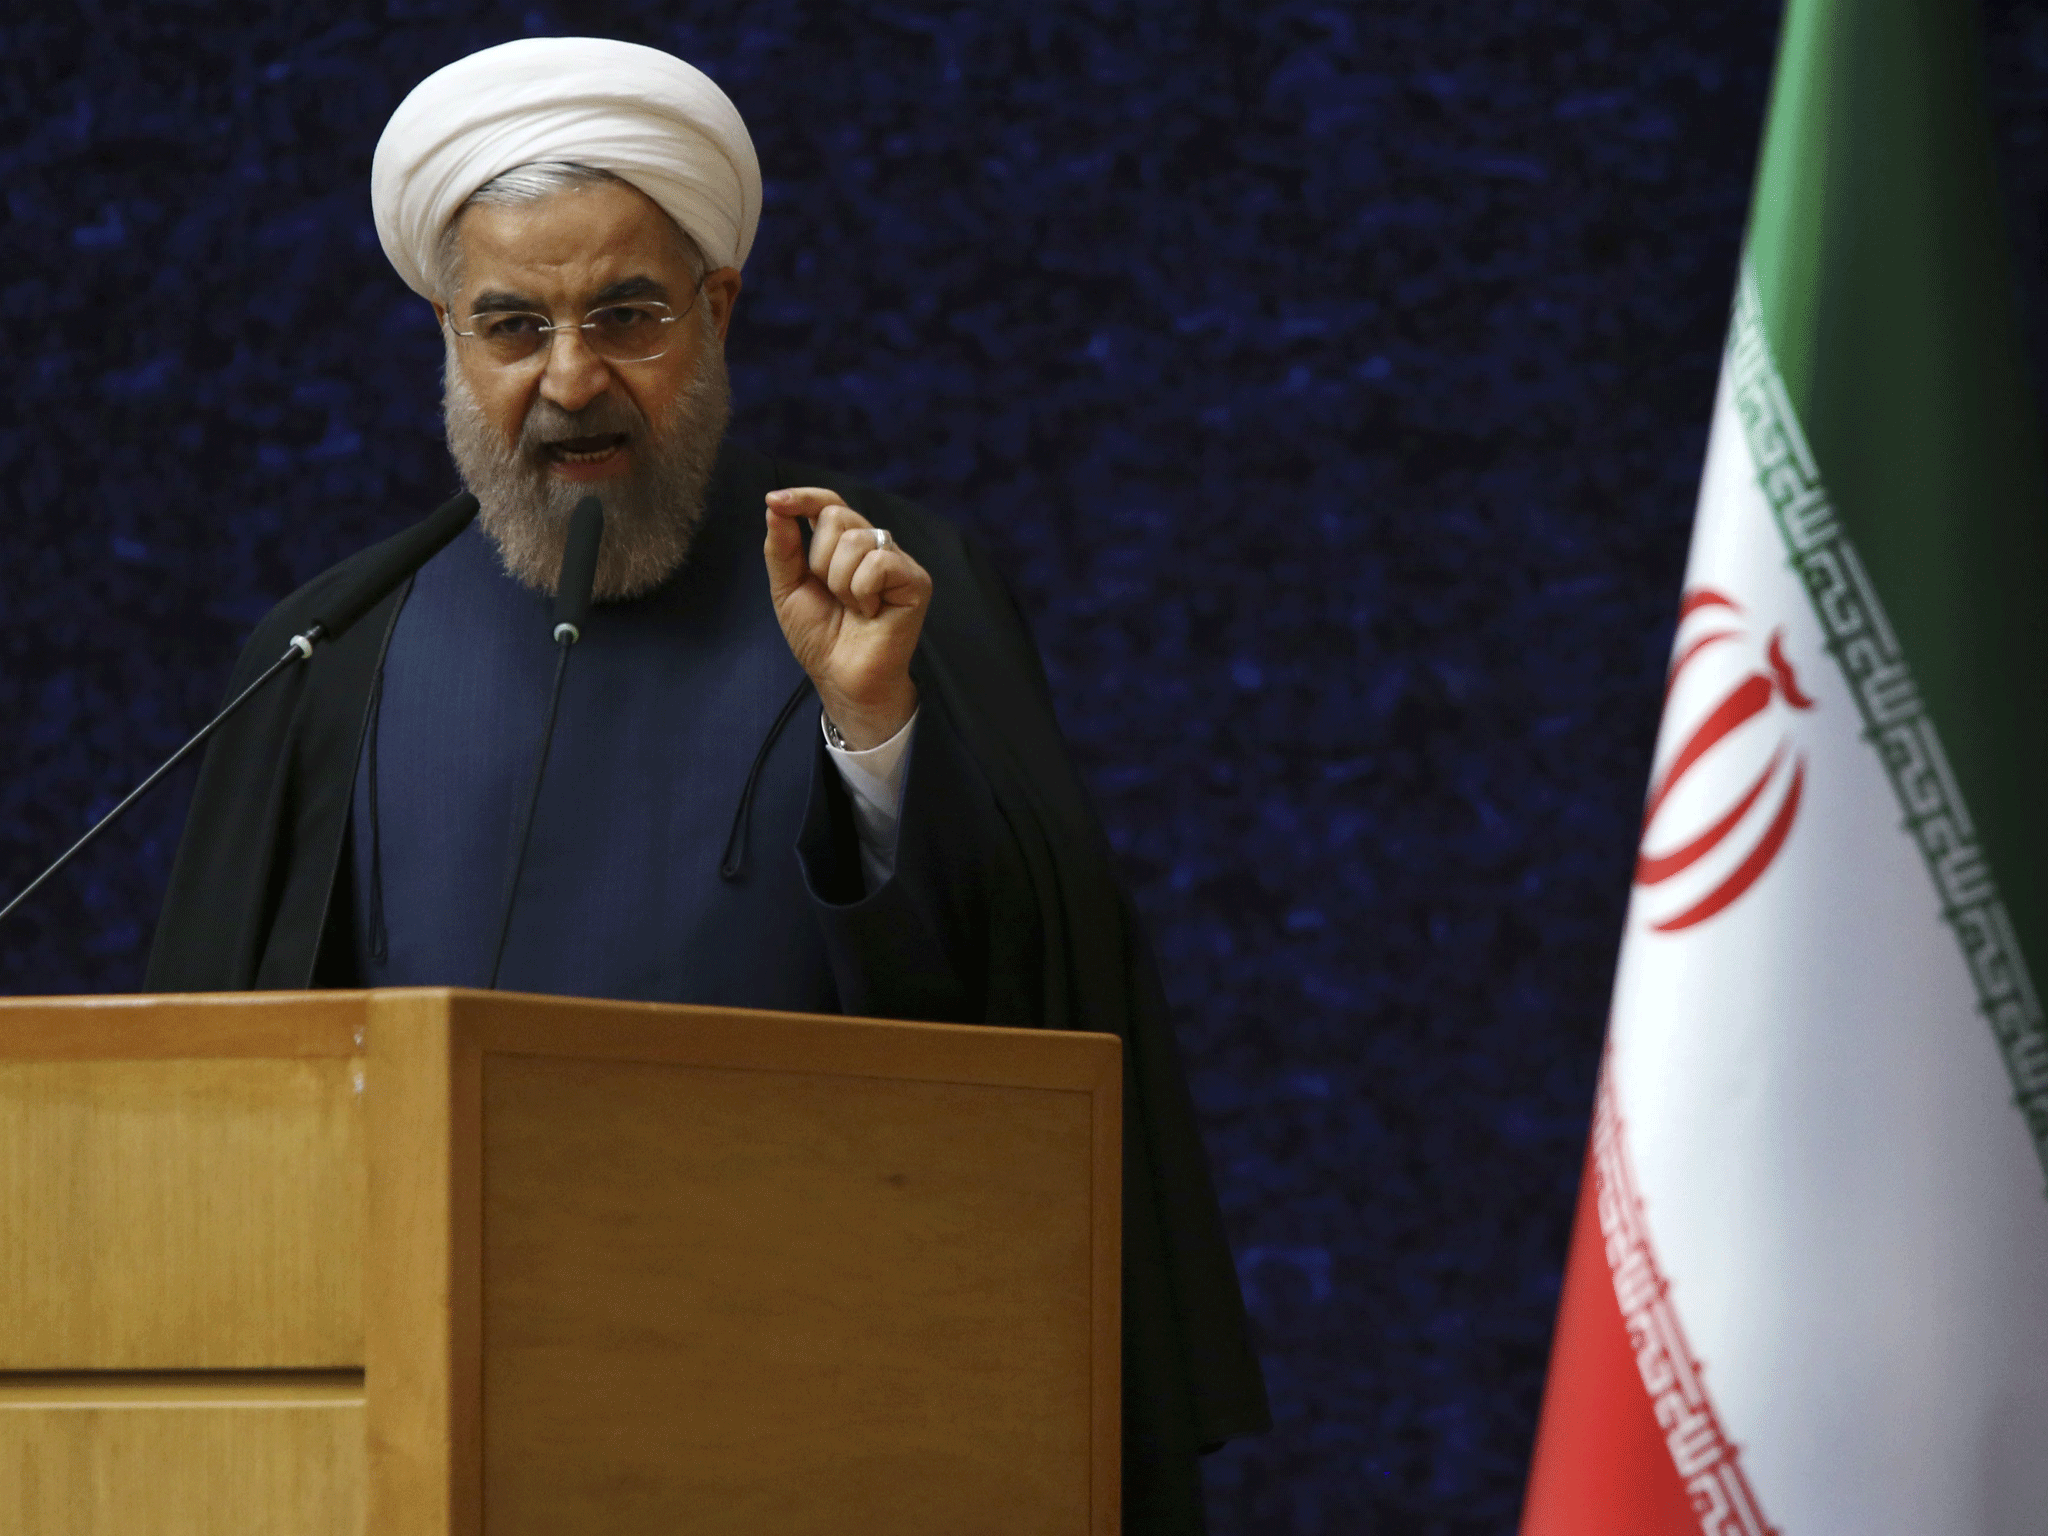 Iranian President Hassan Rouhani delivers his speech in a ceremony marking National Nuclear Technology Day, in Tehran, Iran, Thursday, April 9, 2015